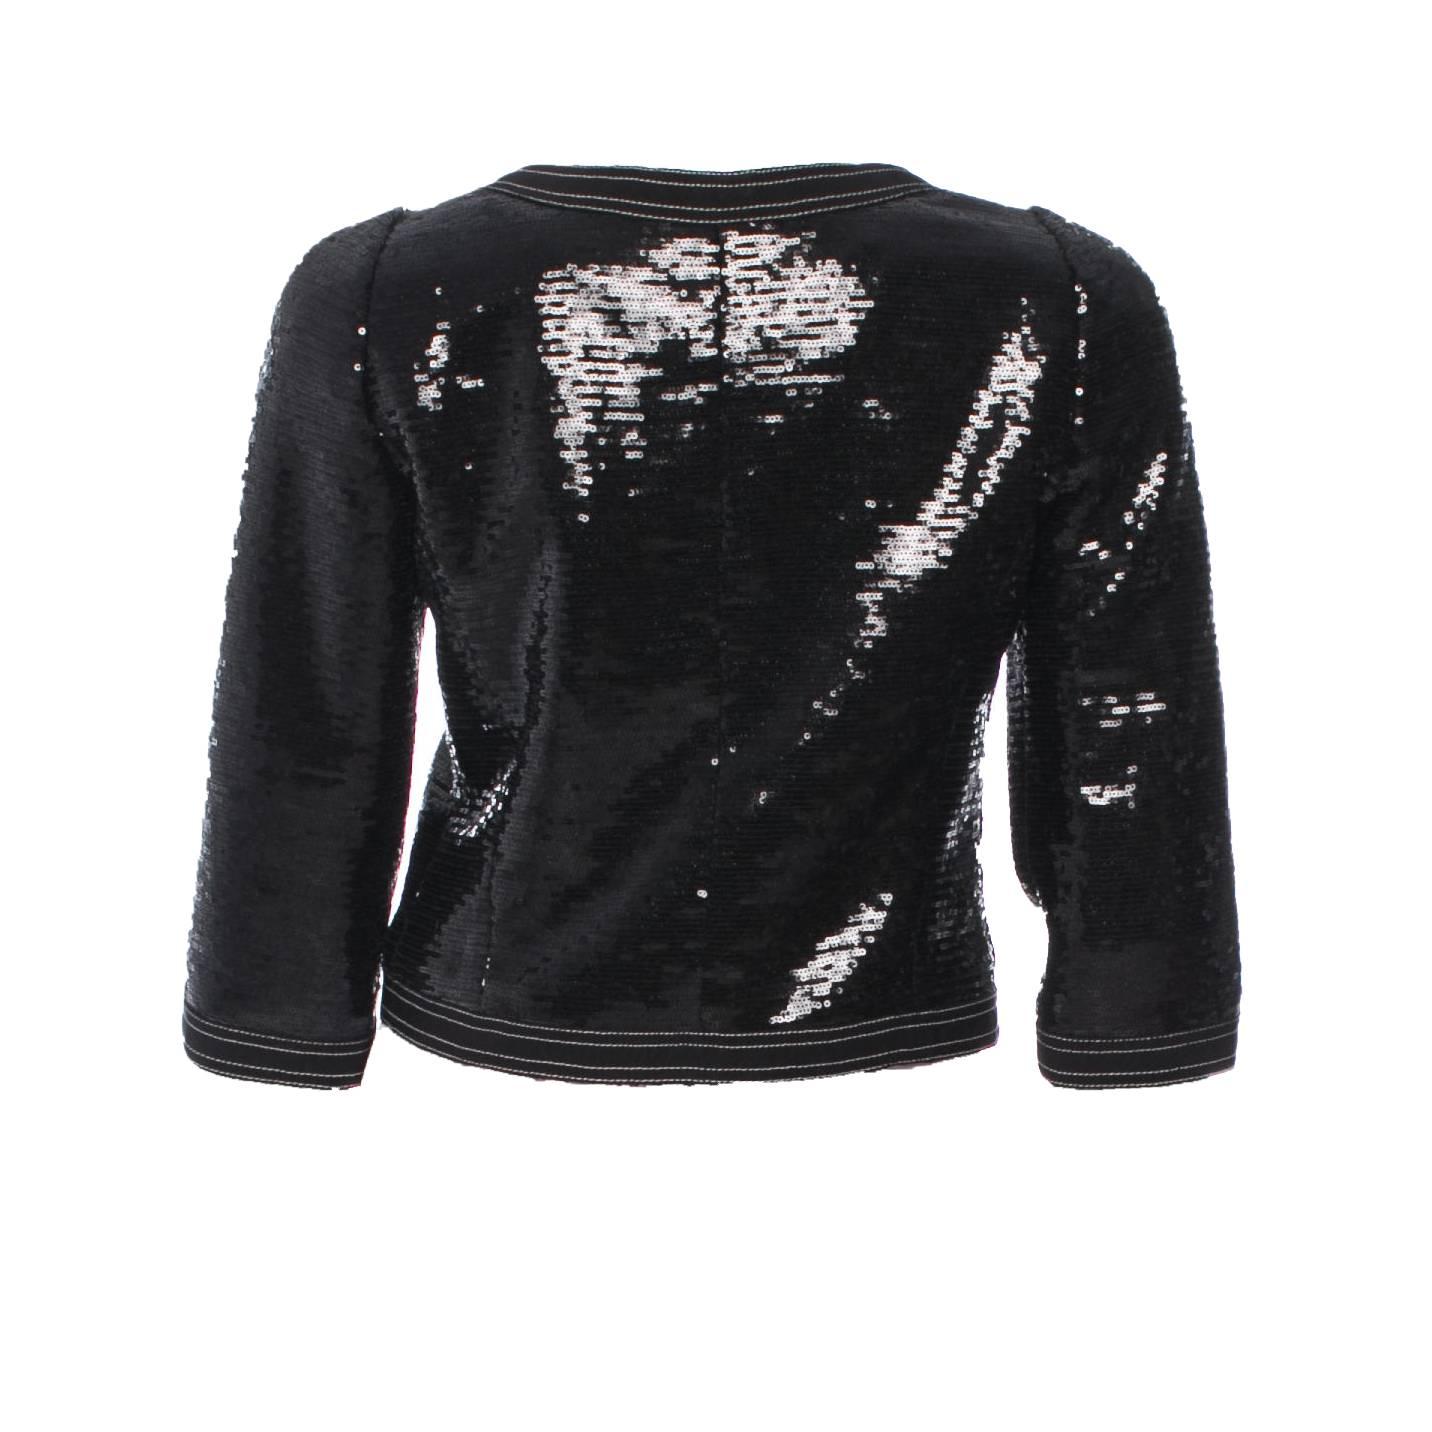 Stunning Black Chanel Sequin Jacket
Classic but modern version of Chanel`s famous 